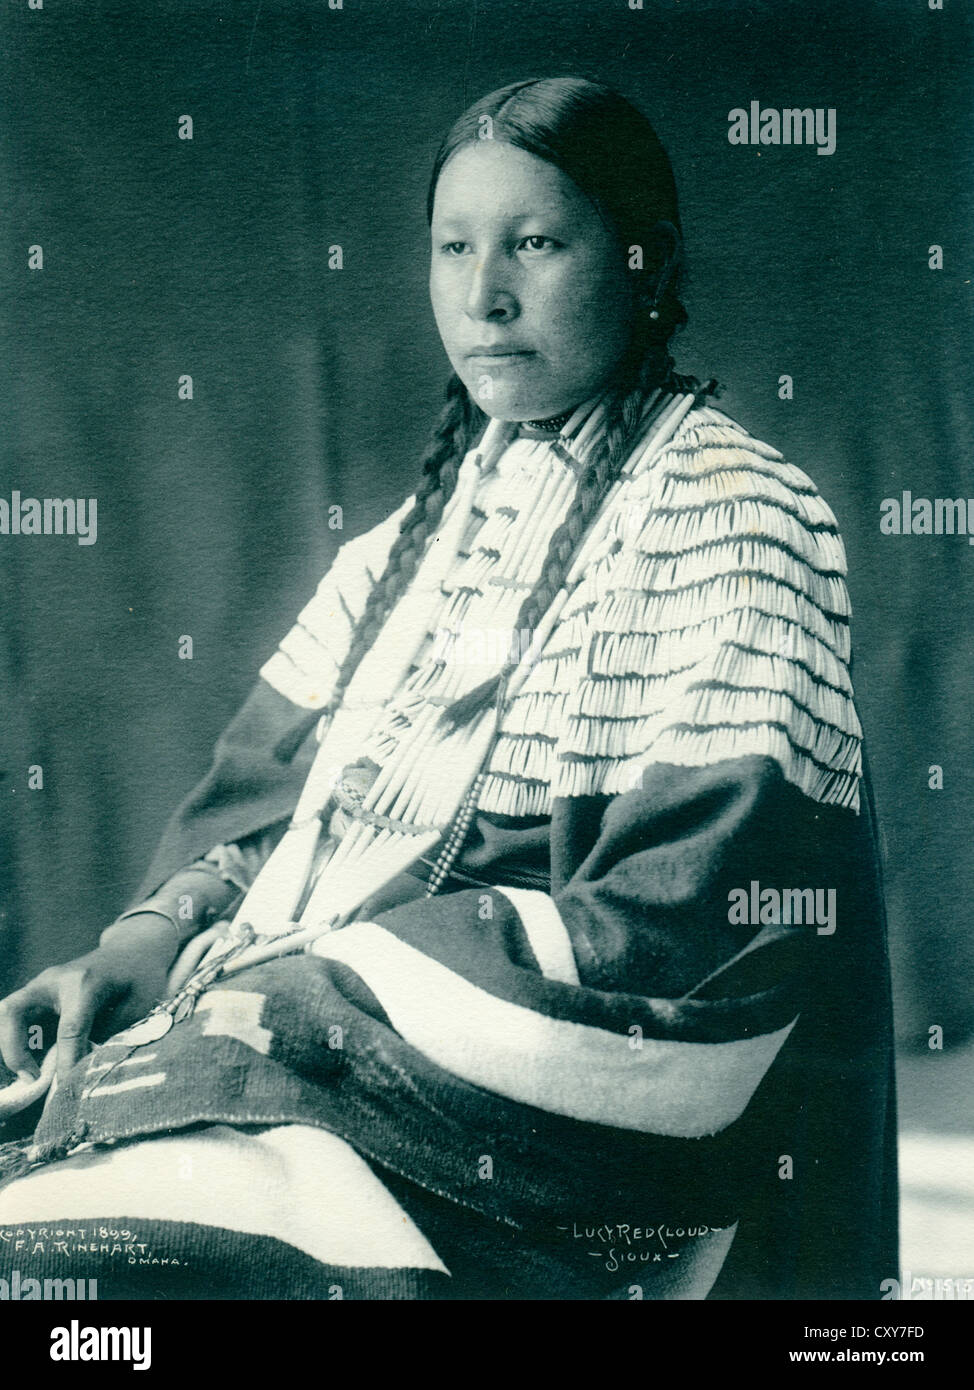 Lucy Red Cloud, 1899, Adolph Muhr & Frank A. Rinehart - Stock Photo